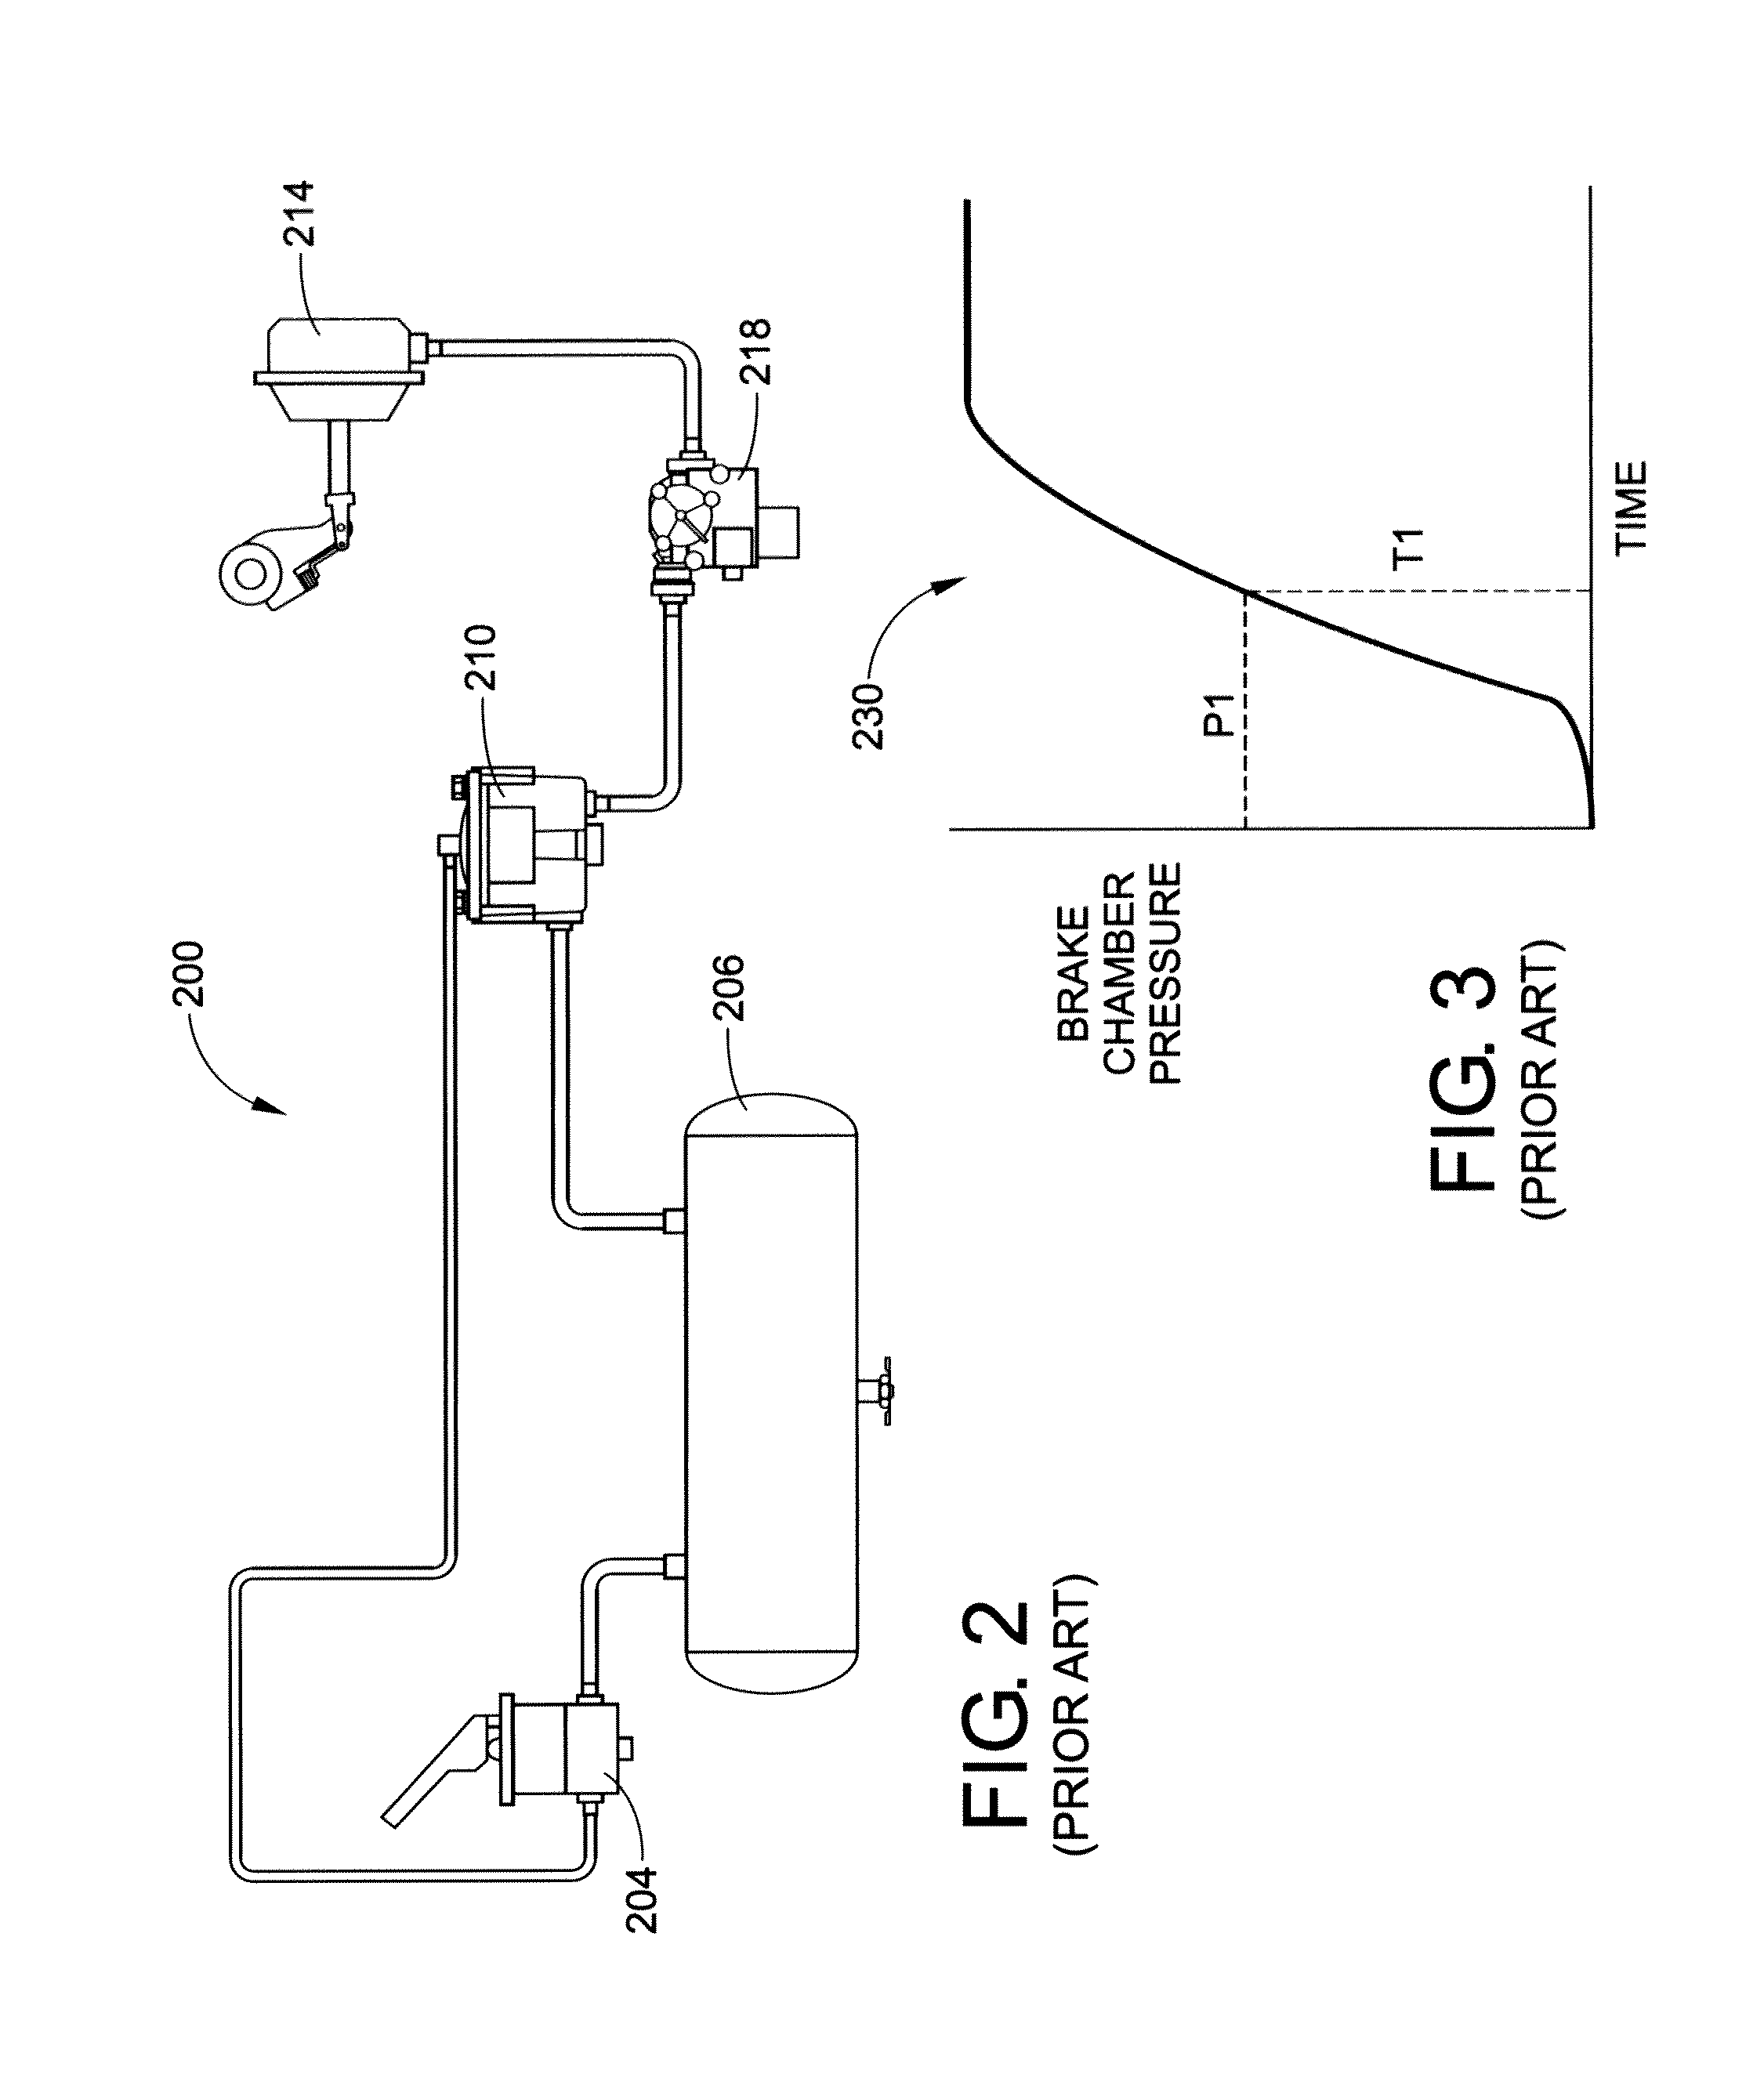 Relay valve control arrangement to provide variable response timing on full applications